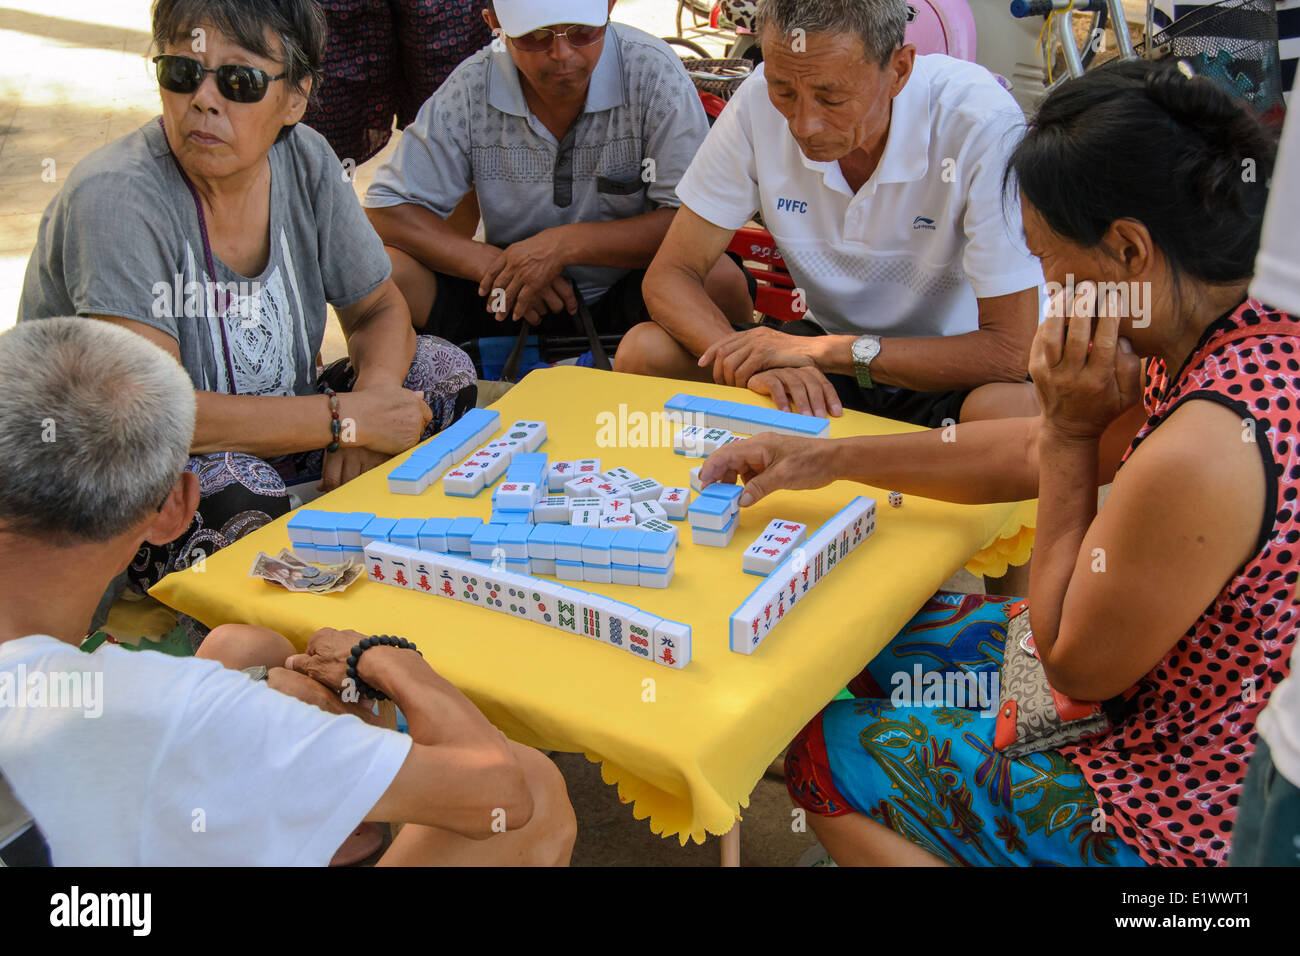 Some old people playing mahjong on the summer beach. Stock Photo